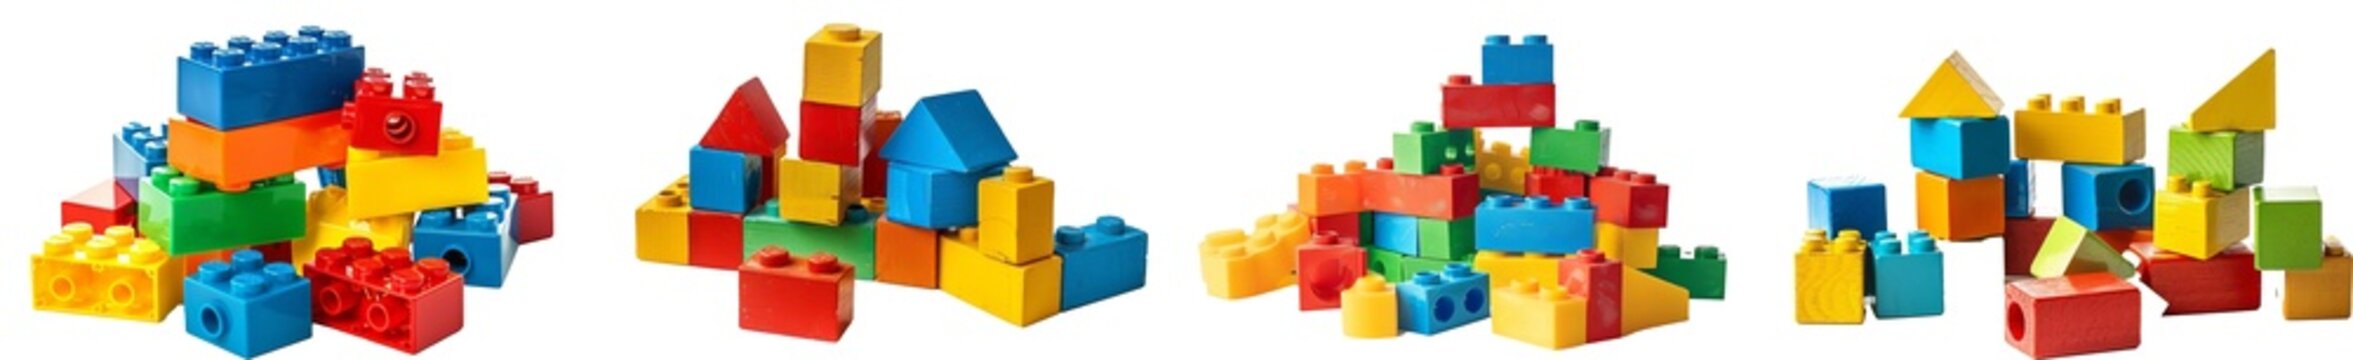 Set of Building blocks on a white background